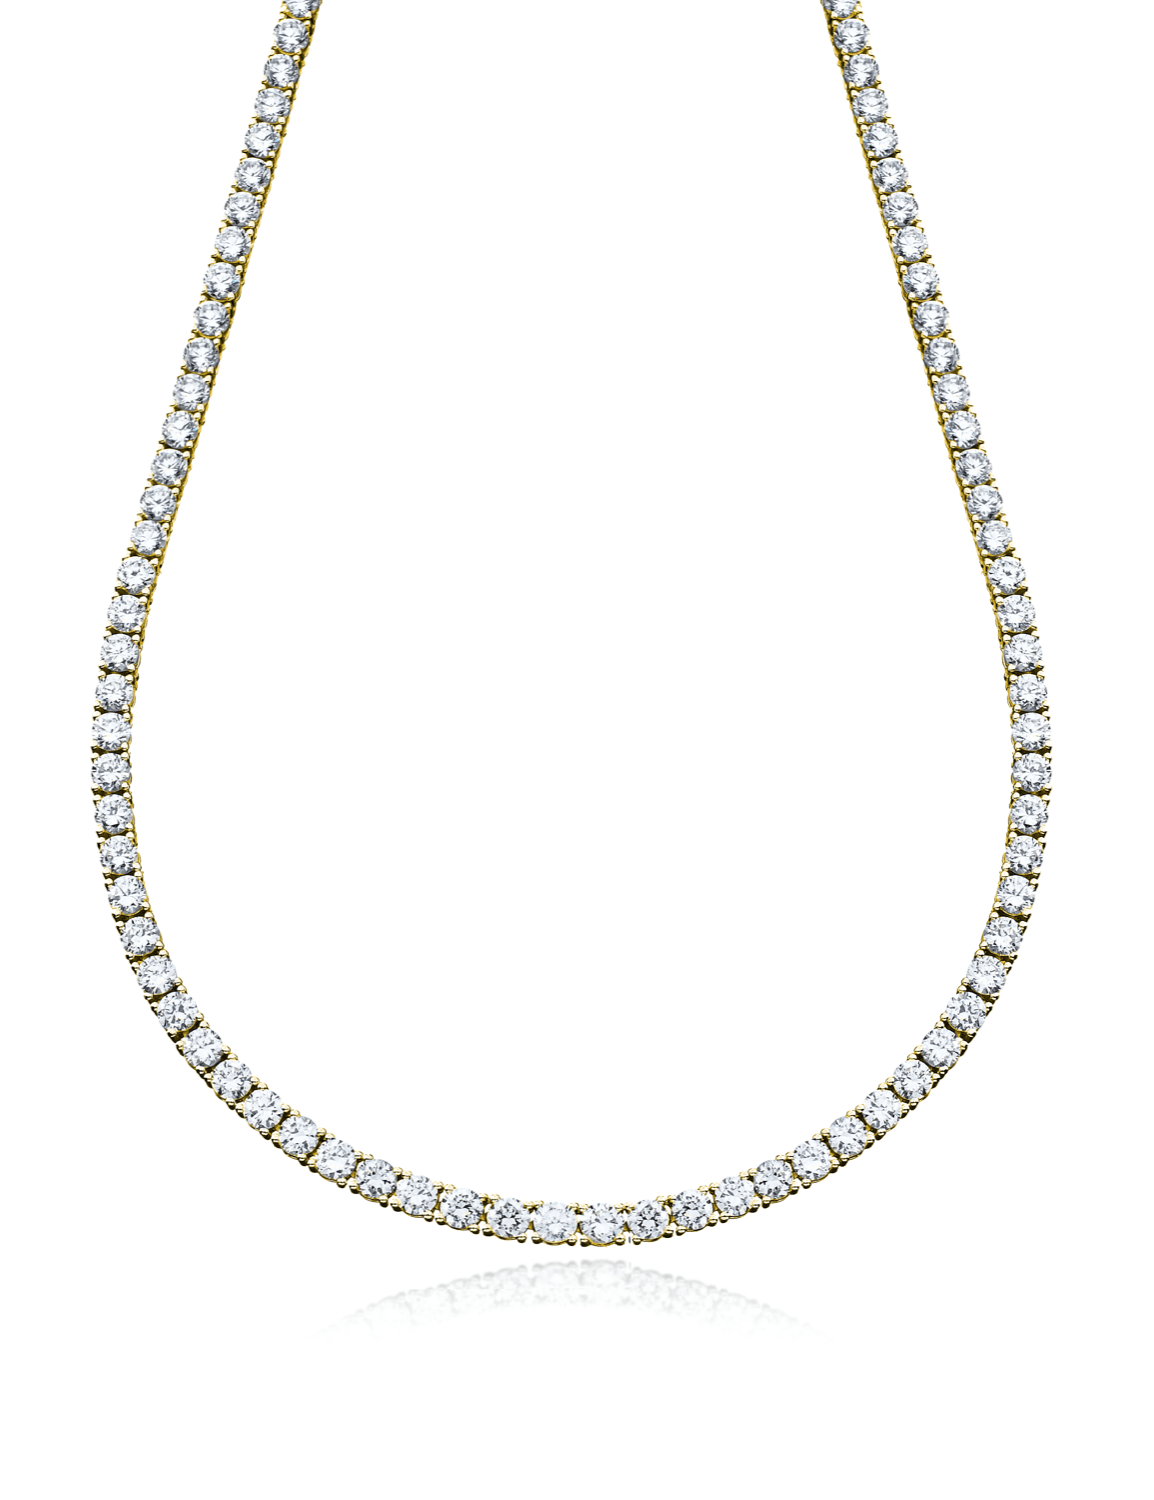 Crislu Jewelry Classic Tennis Necklace Finished in 18kt Yellow Gold - 16"